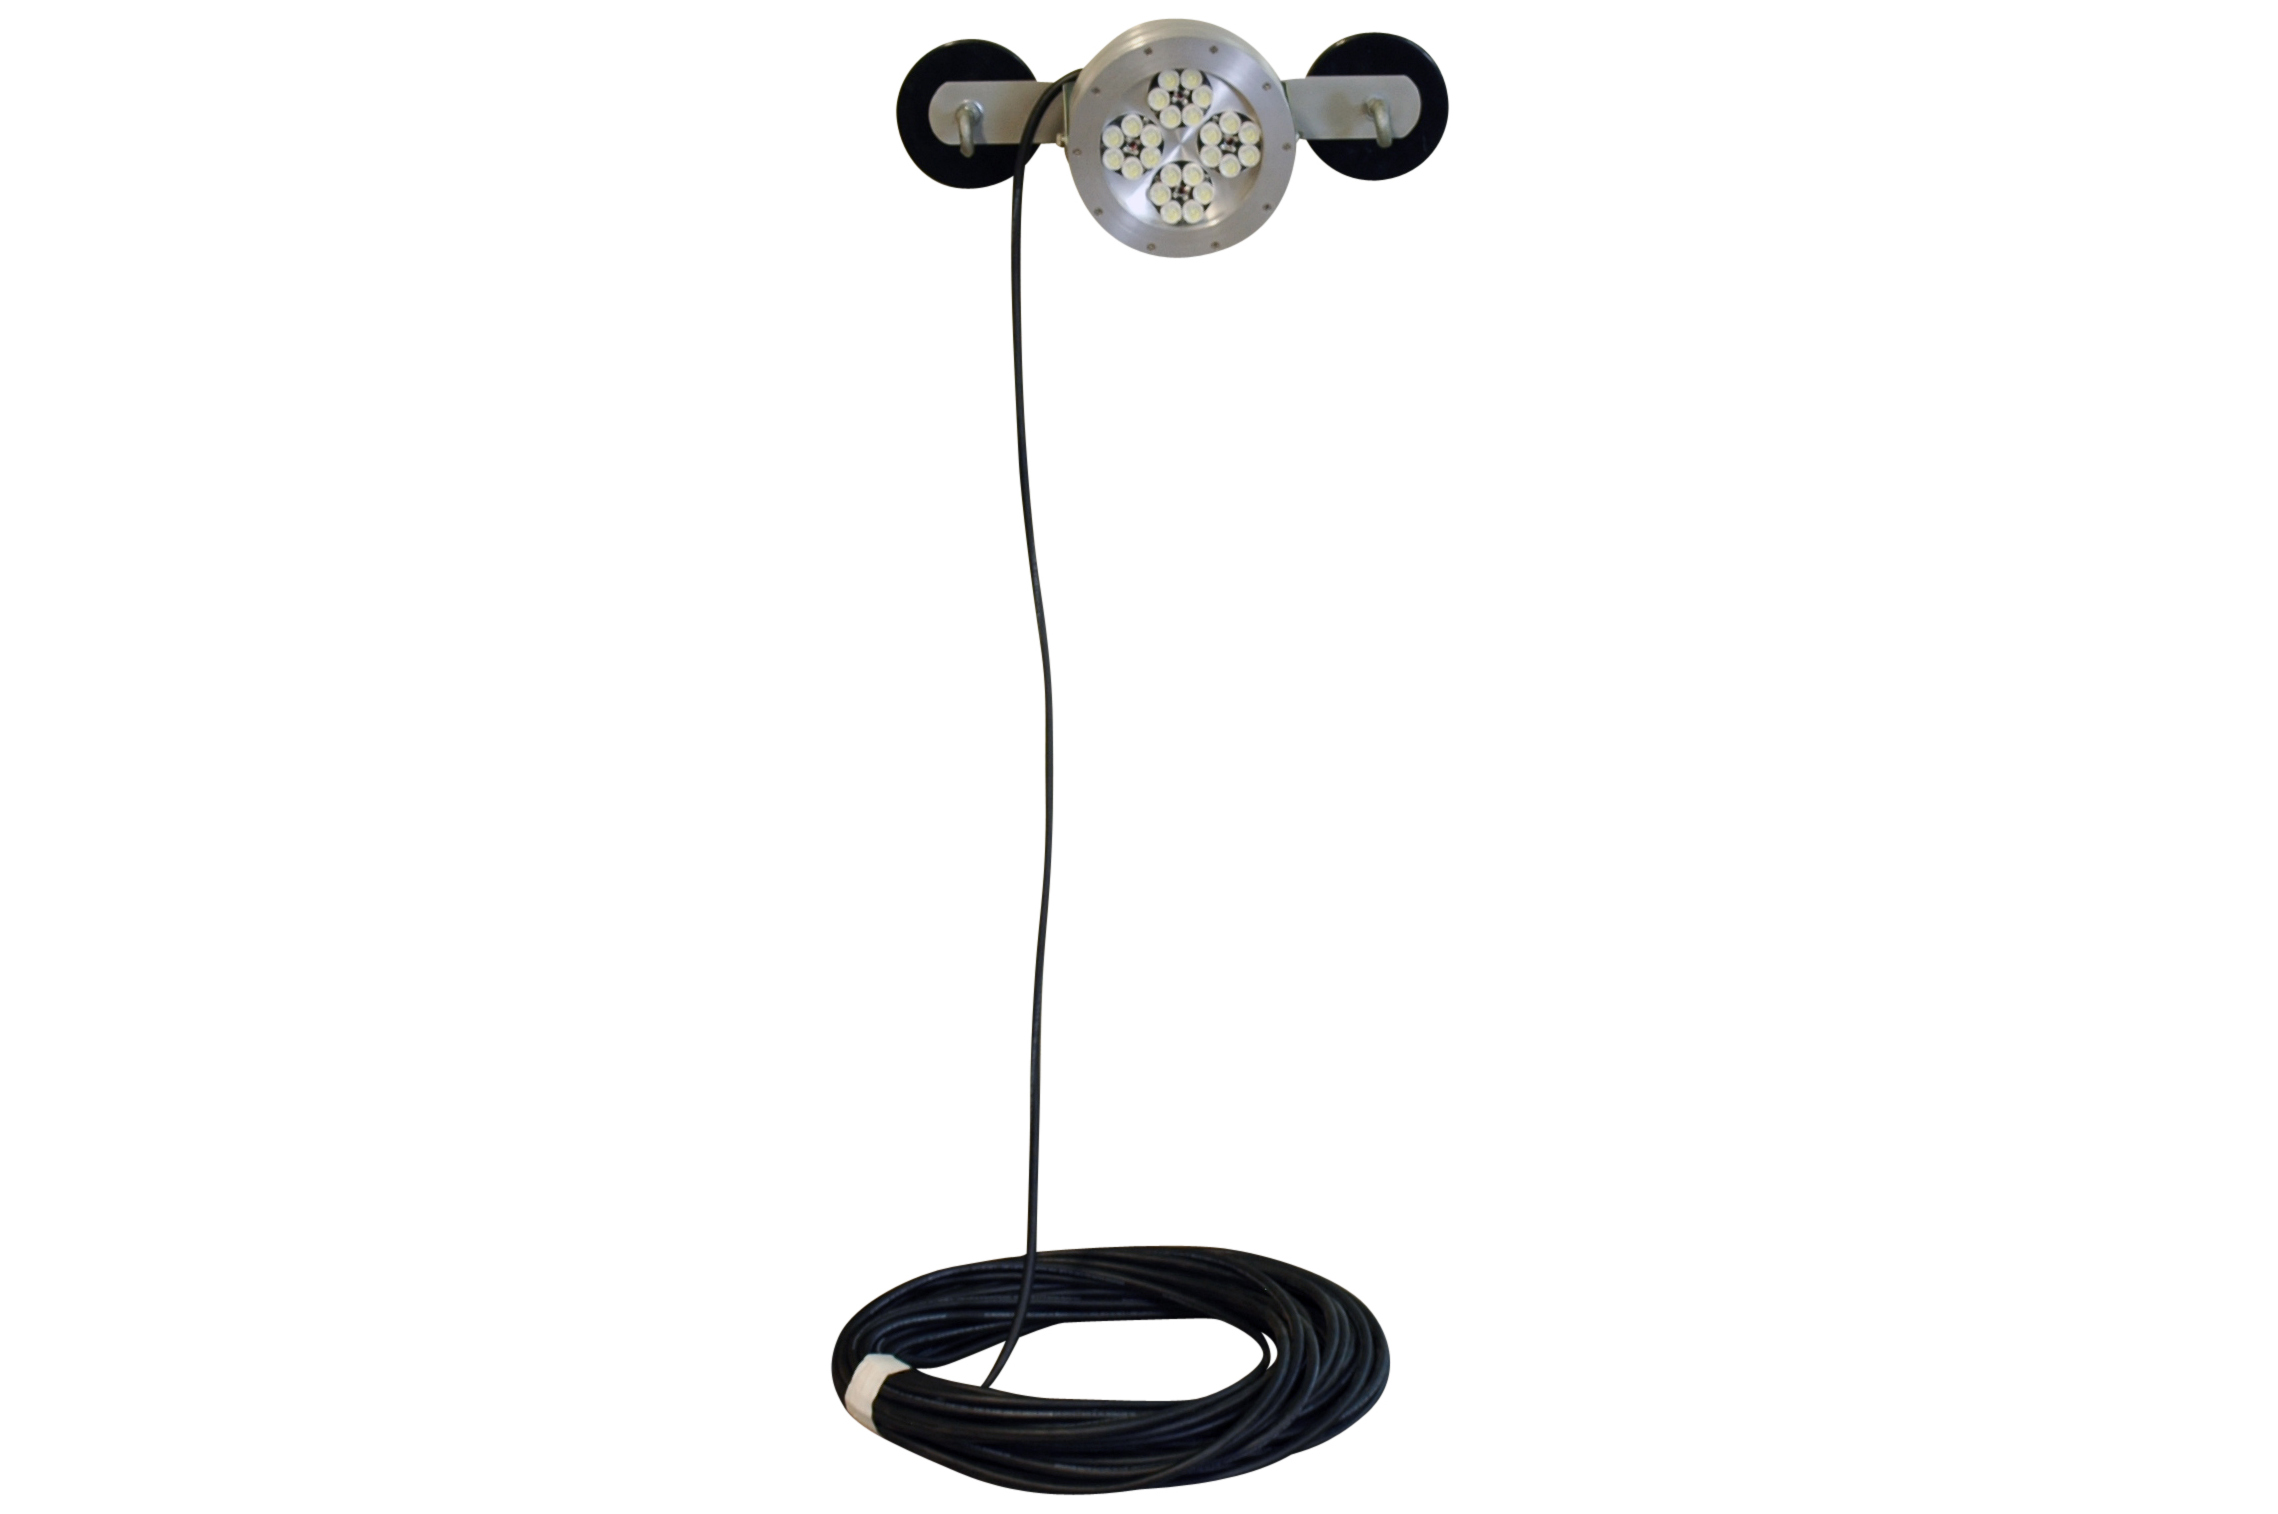 Magnetic Mount 31 Watt Low Voltage LED Fixture with 50' Cord